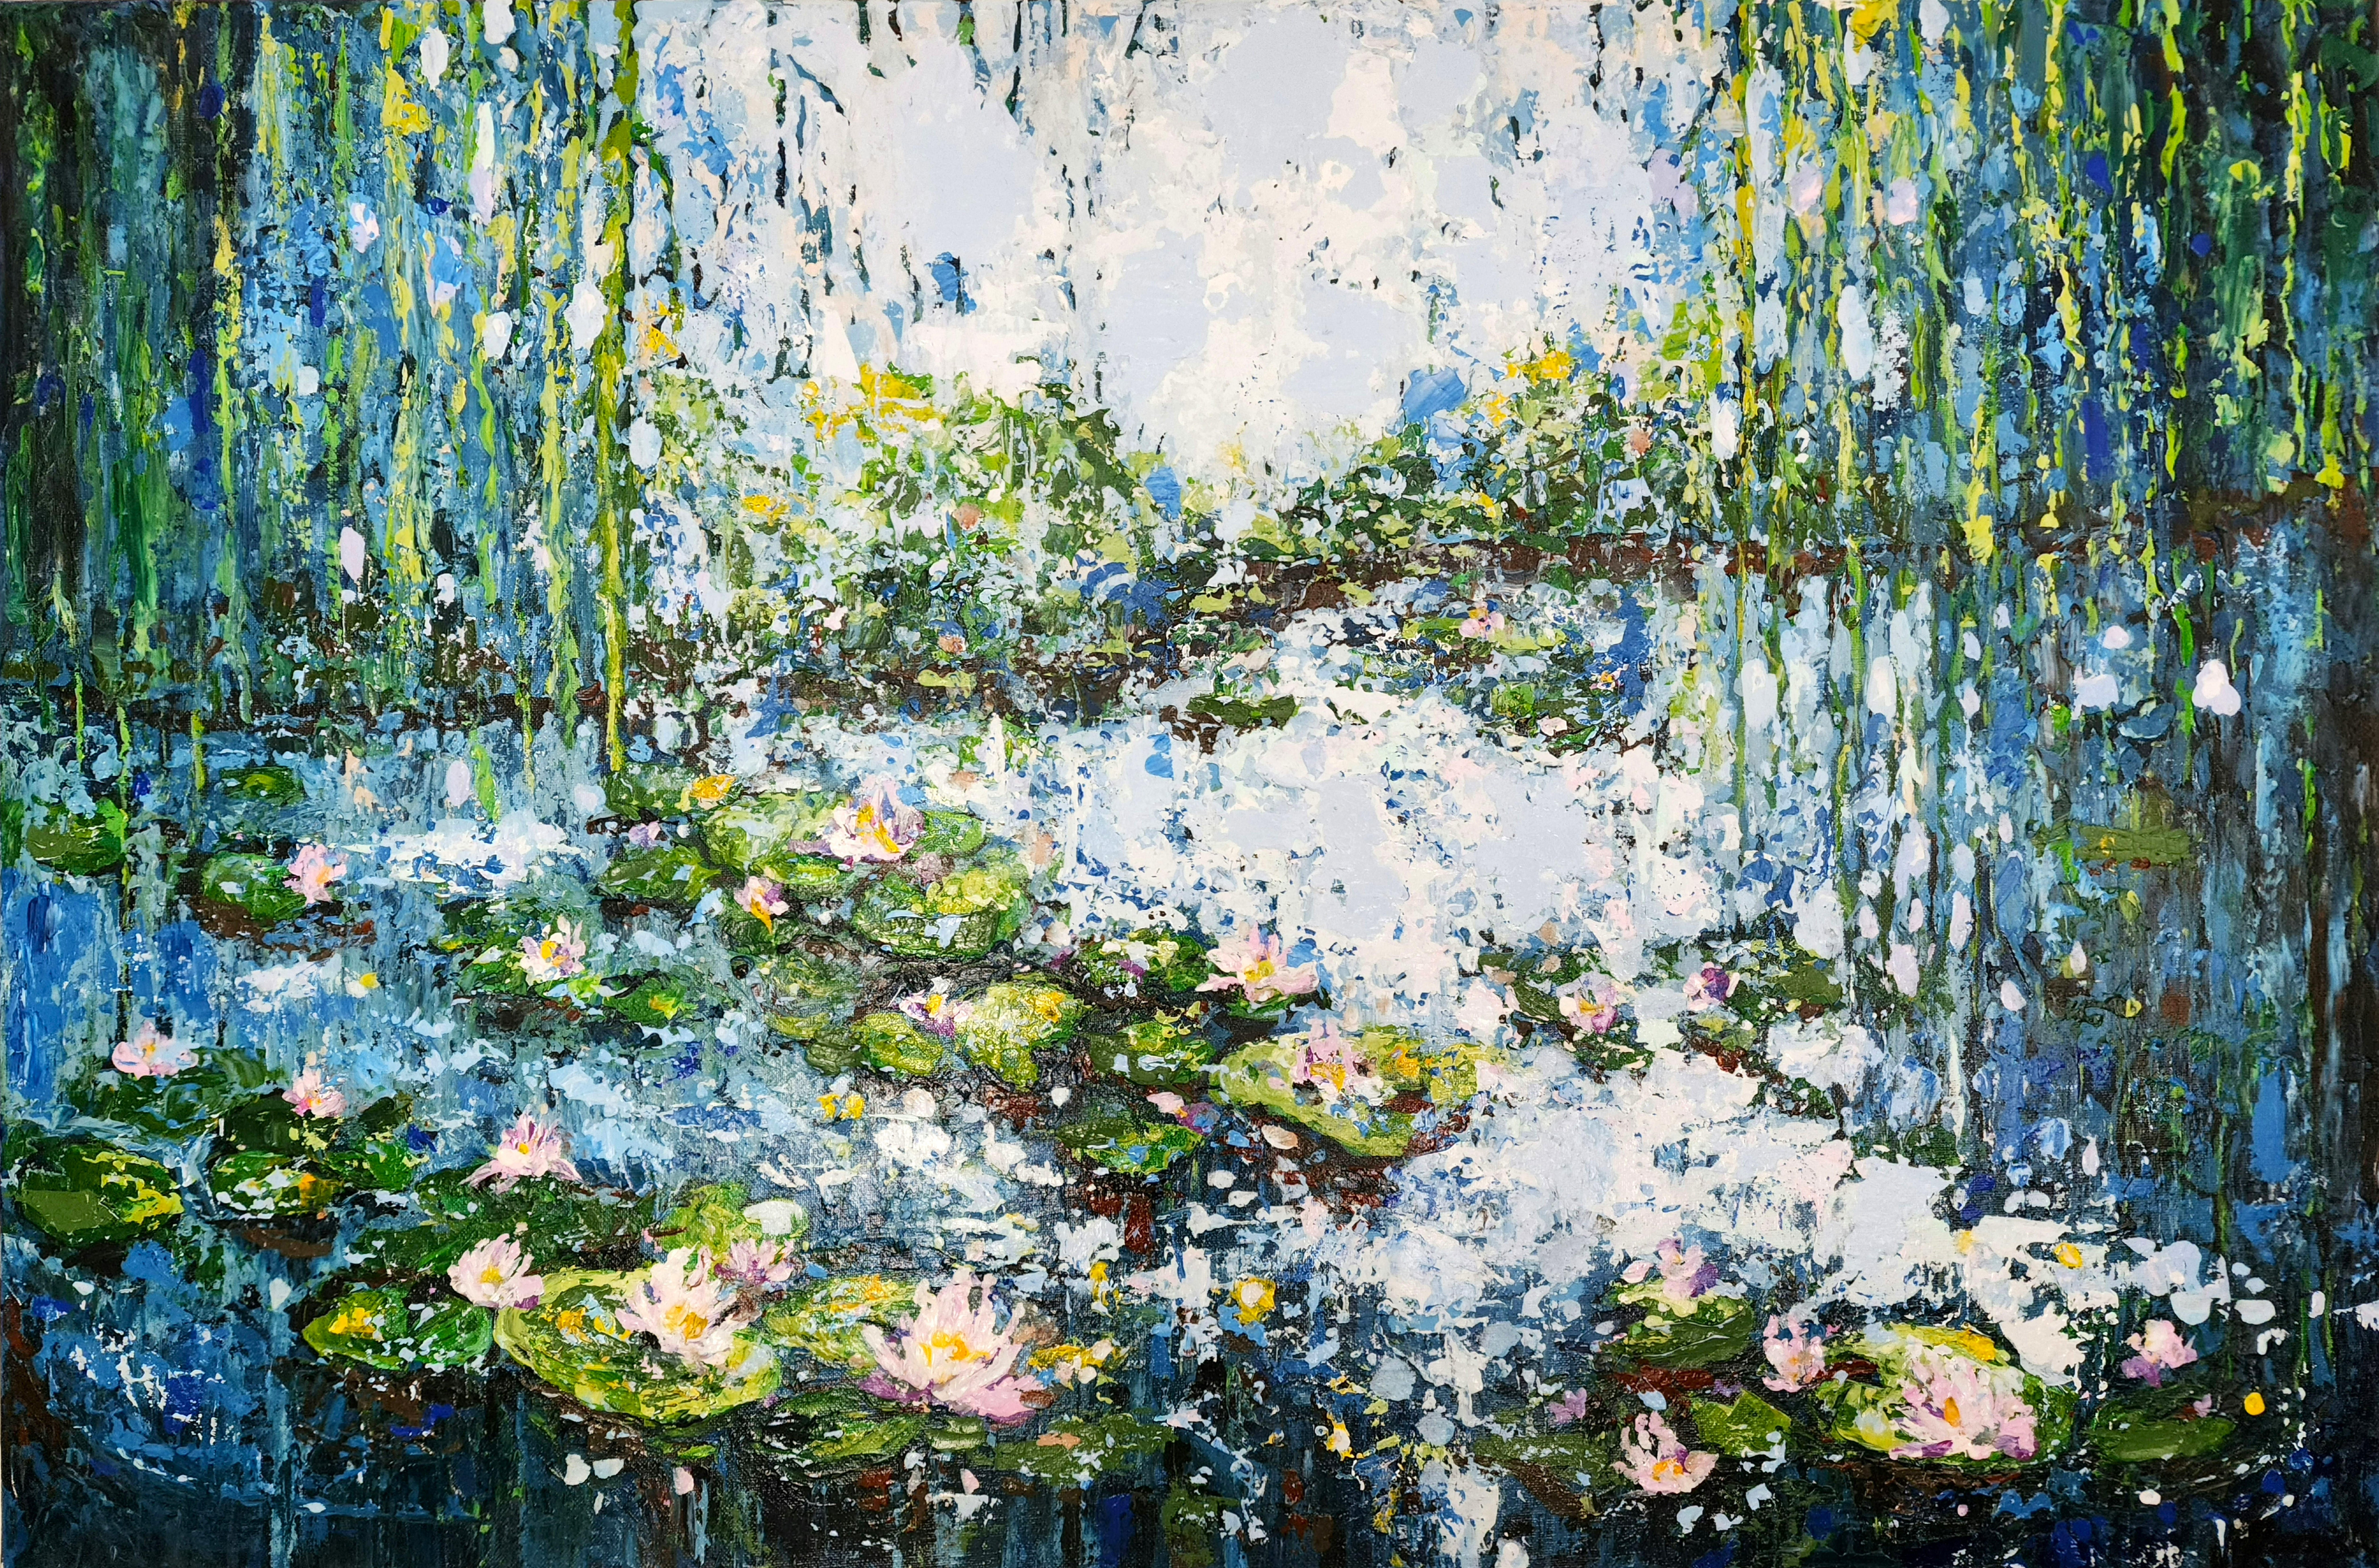 Karnish Art Abstract Painting - Water Lily Pond - Monet Blue Willow Stillness Green Impressionist Nature Floral